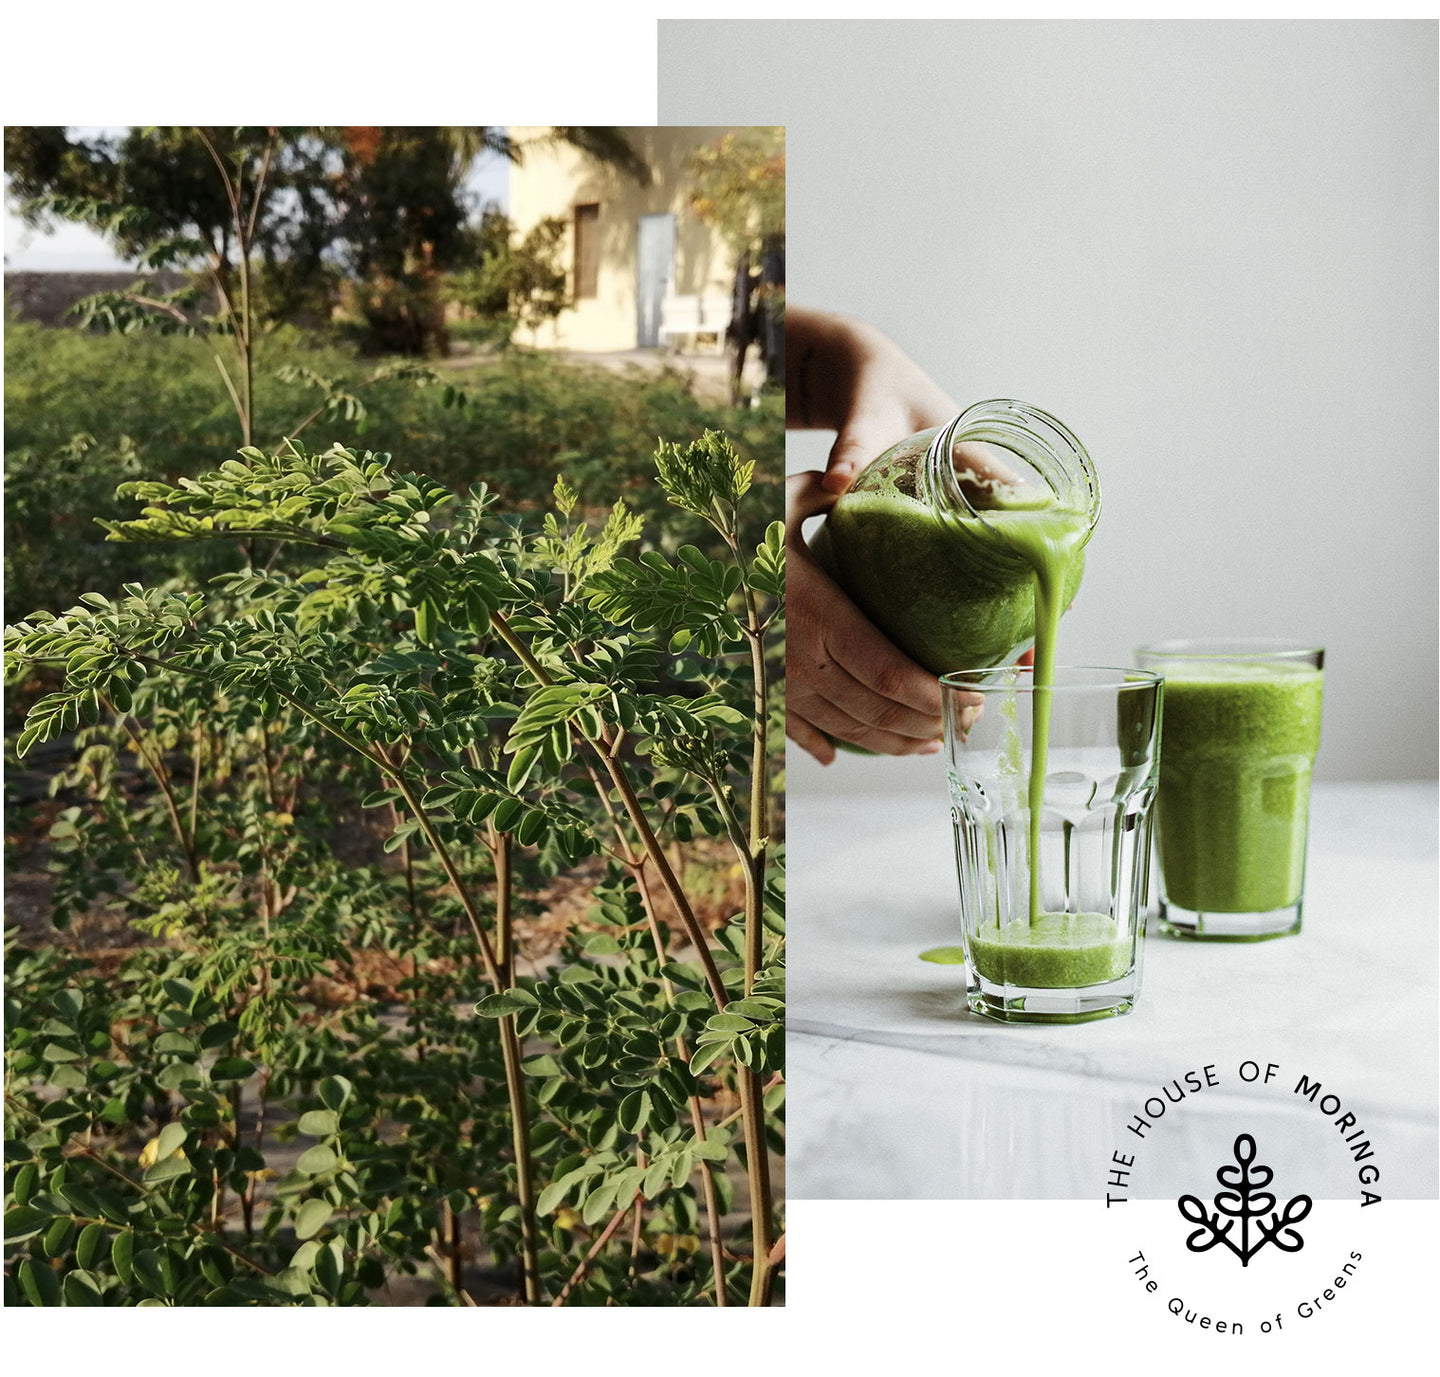 Moringa leaves are harvested from the Moringa Oleifera tree, known for being the most nutrient-dense plant on the planet. Every part of the tree has incredible healing properties. Traditional knowledge on the extensive benefits of moringa is ancient.